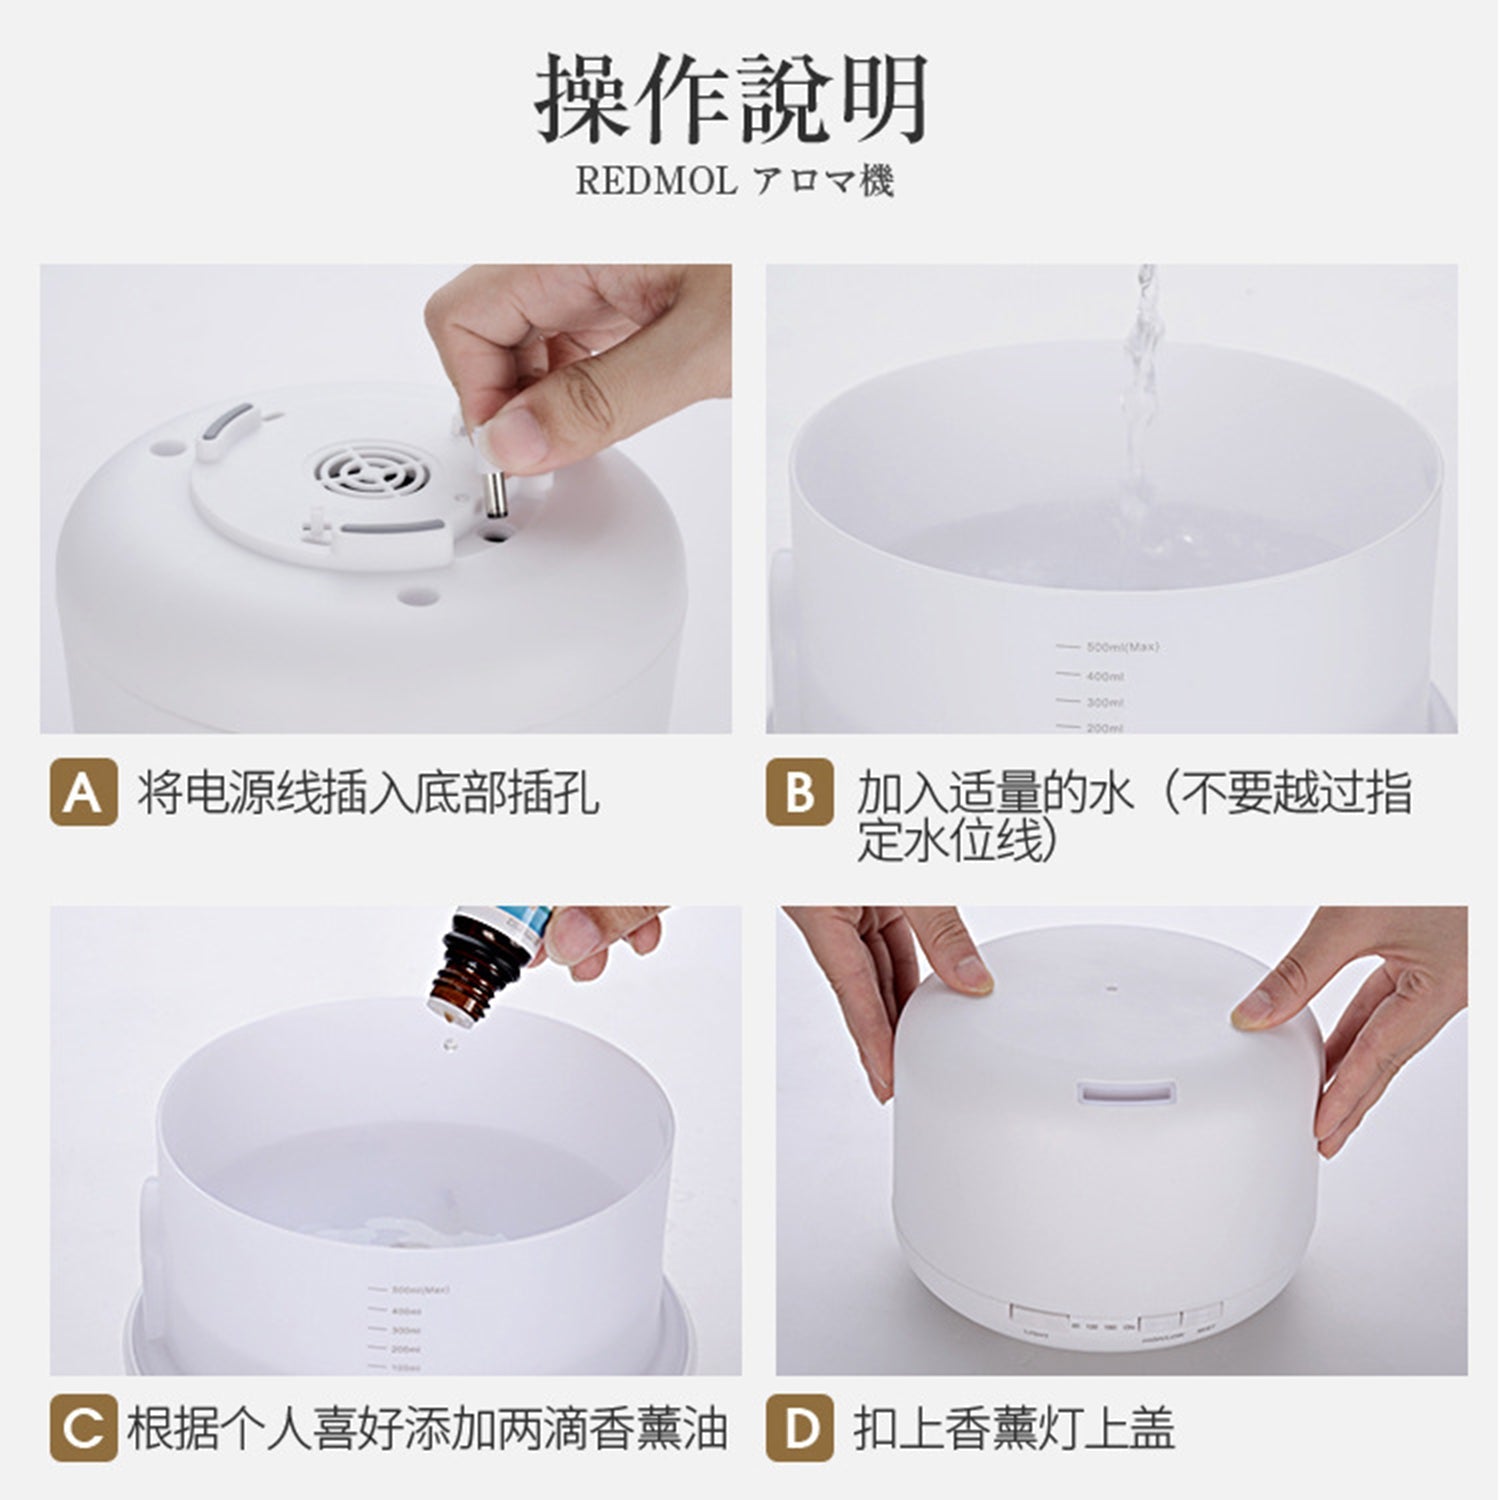 Ultrasonic Aromatherapy Diffuser Essential Oil Humidifier 500ML Night Light with Remote Control - SG Plug Humidifer OEM 